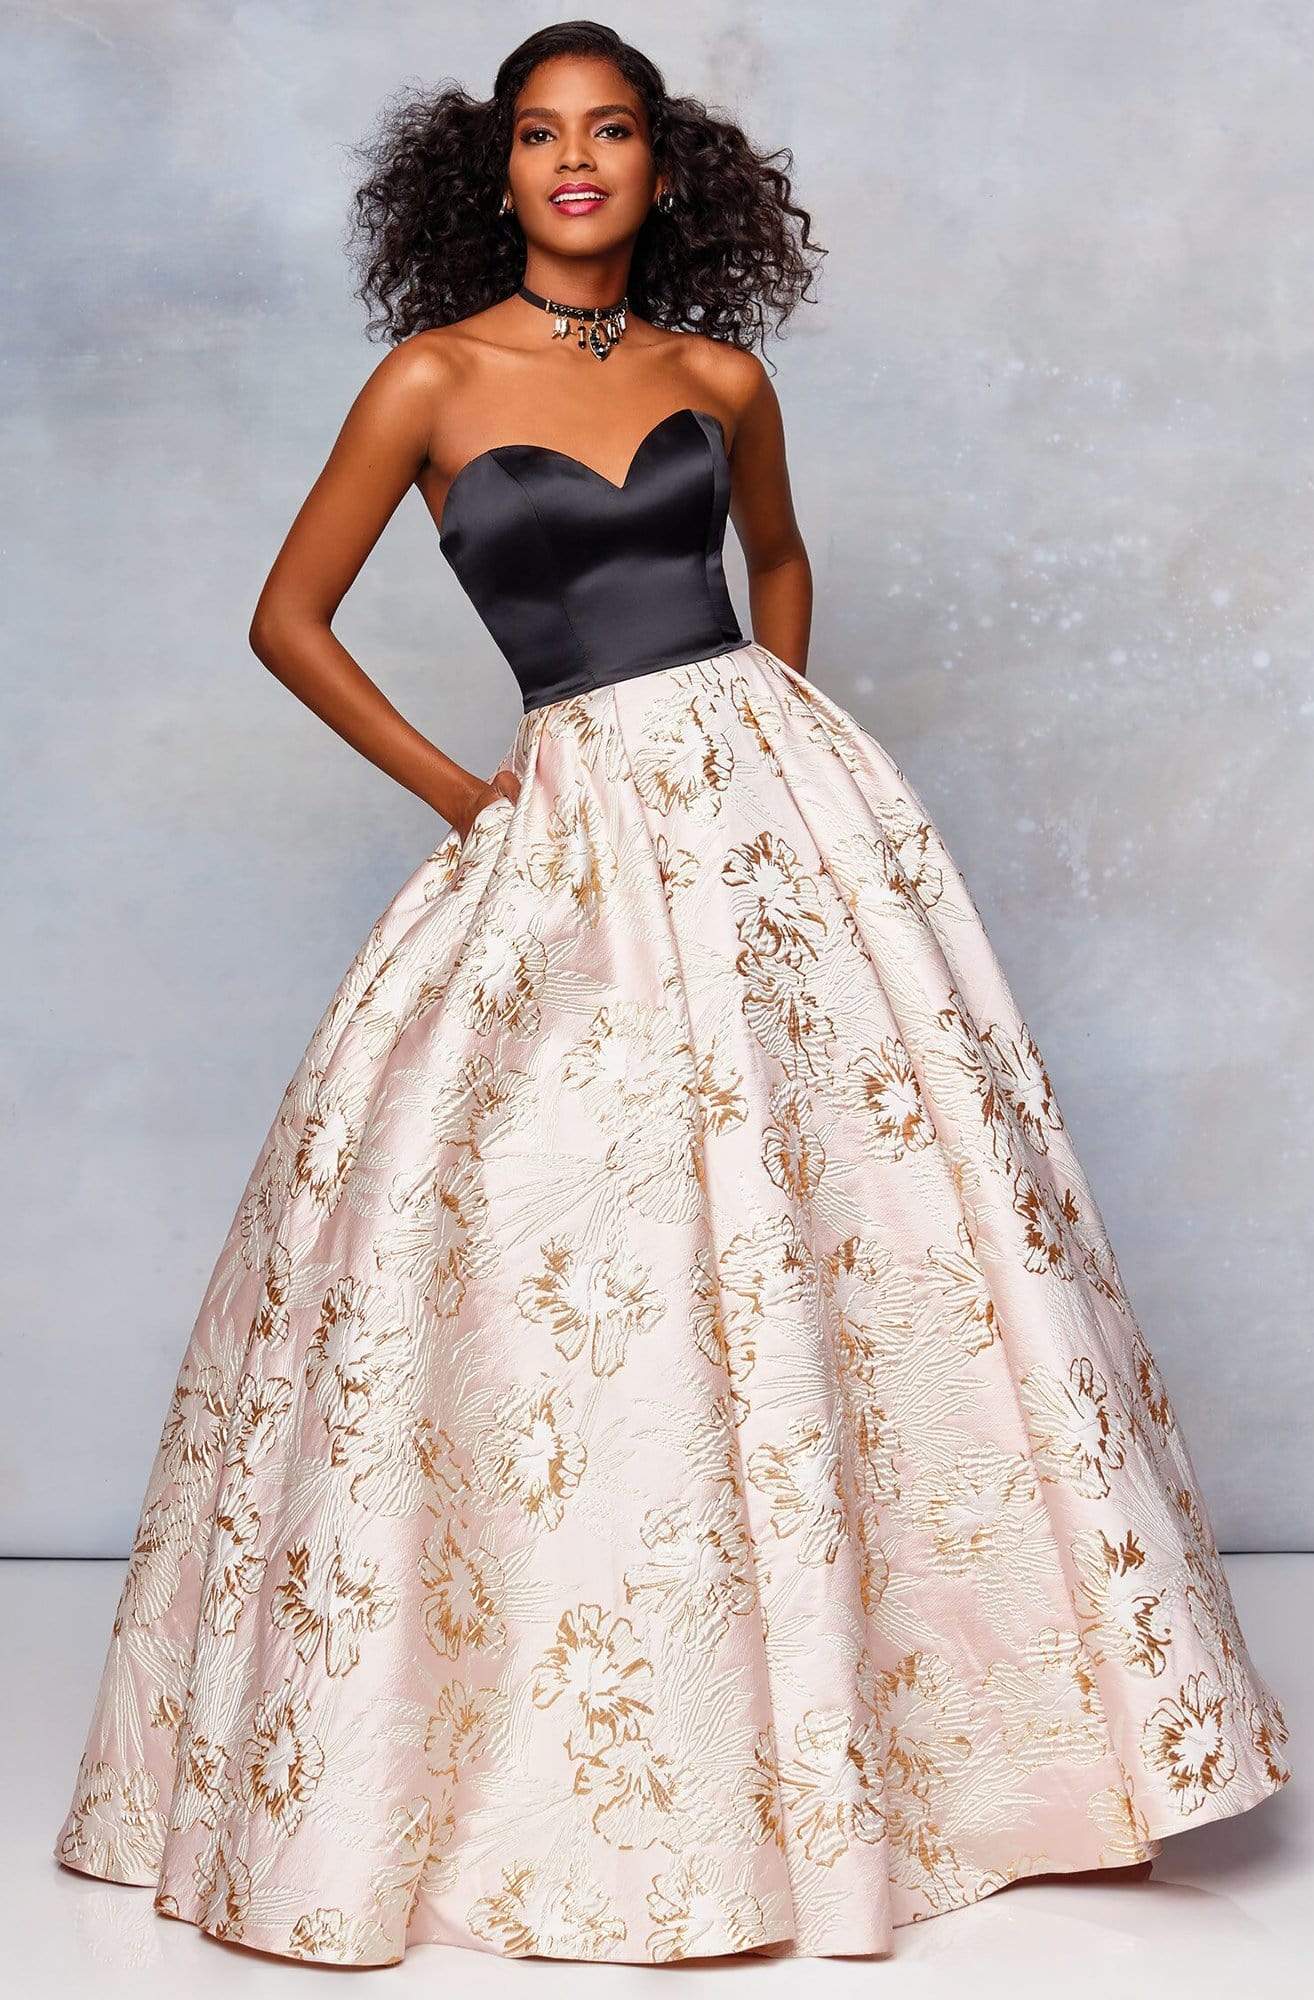 Clarisse - 5032 Two Tone Satin Sweetheart Brocade Ballgown Special Occasion Dress 0 / Black/Blush